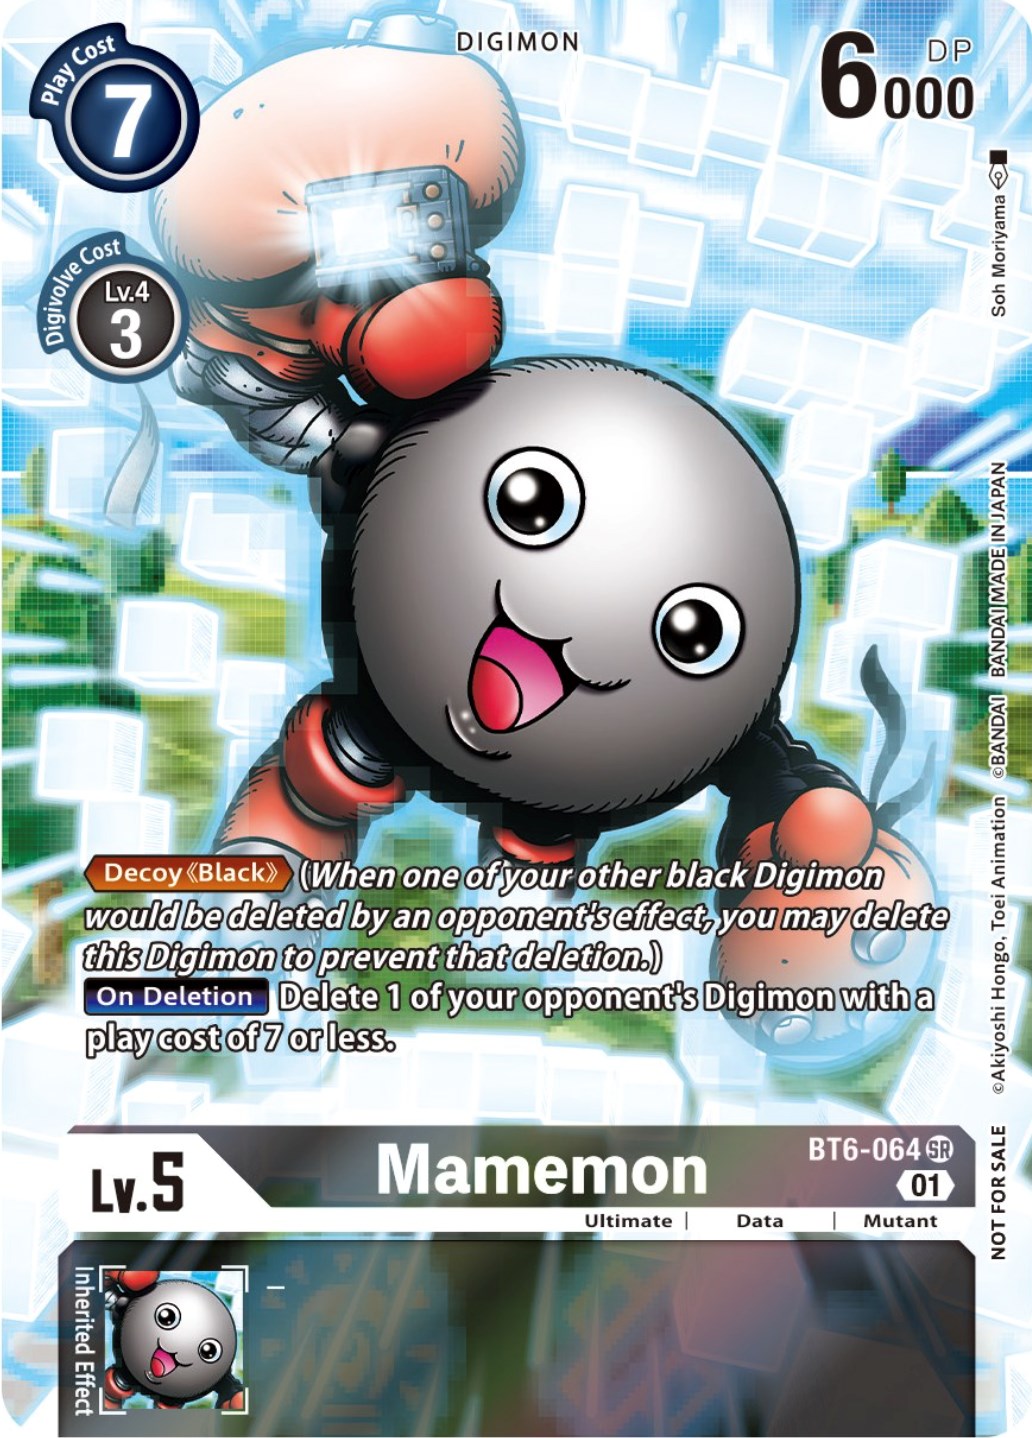 Mamemon [BT6-064] (25th Special Memorial Pack) [Double Diamond Promos] | Red Riot Games CA